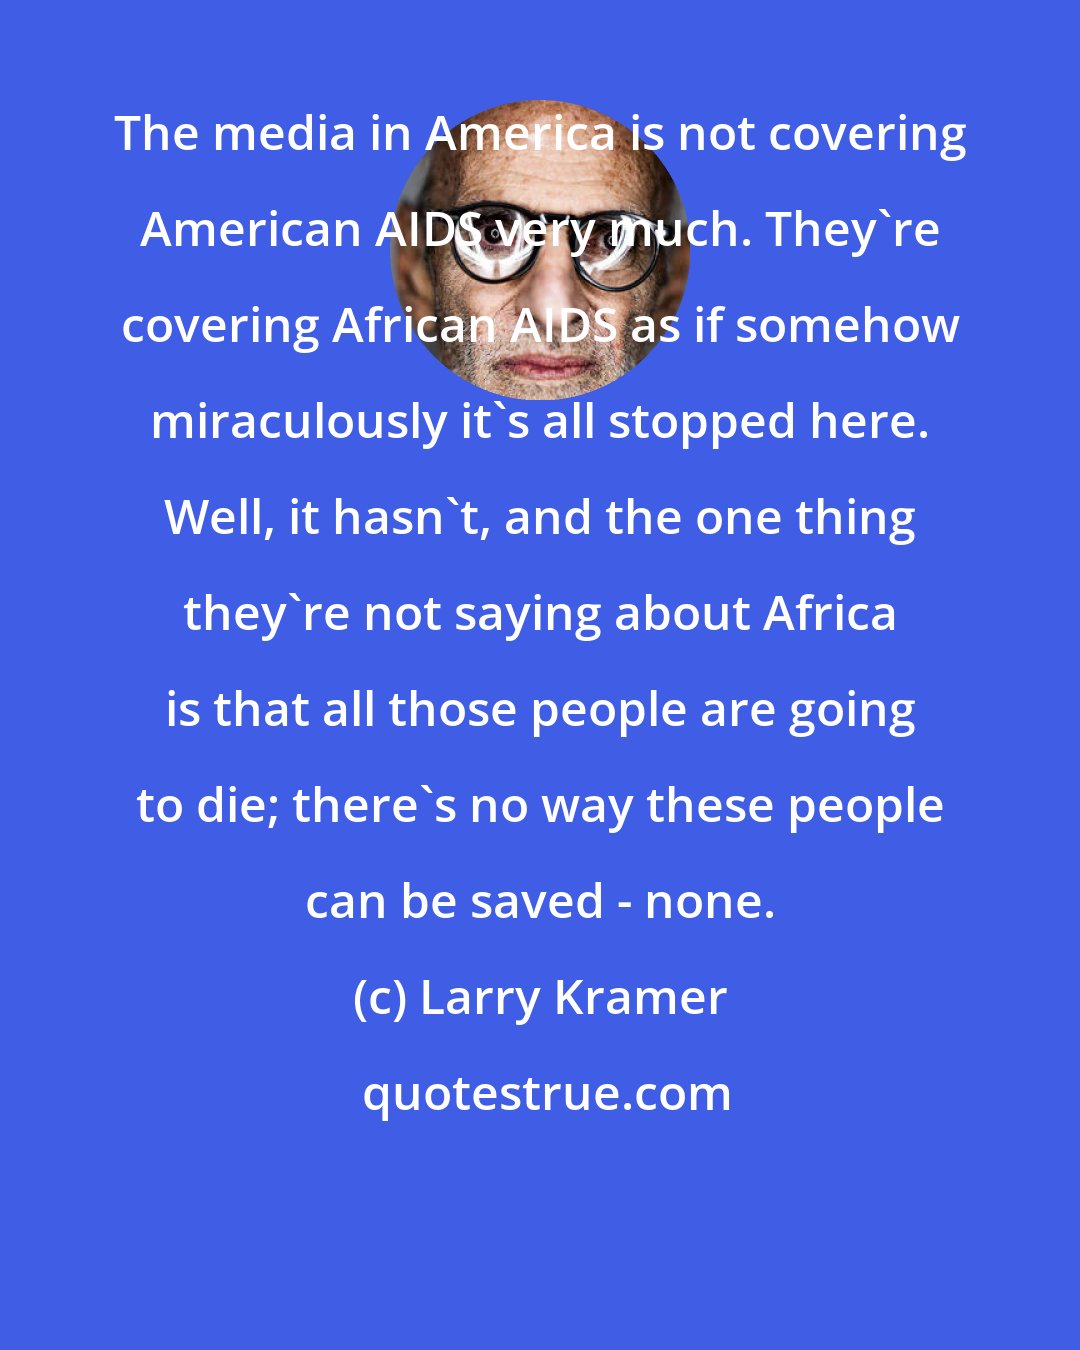 Larry Kramer: The media in America is not covering American AIDS very much. They're covering African AIDS as if somehow miraculously it's all stopped here. Well, it hasn't, and the one thing they're not saying about Africa is that all those people are going to die; there's no way these people can be saved - none.